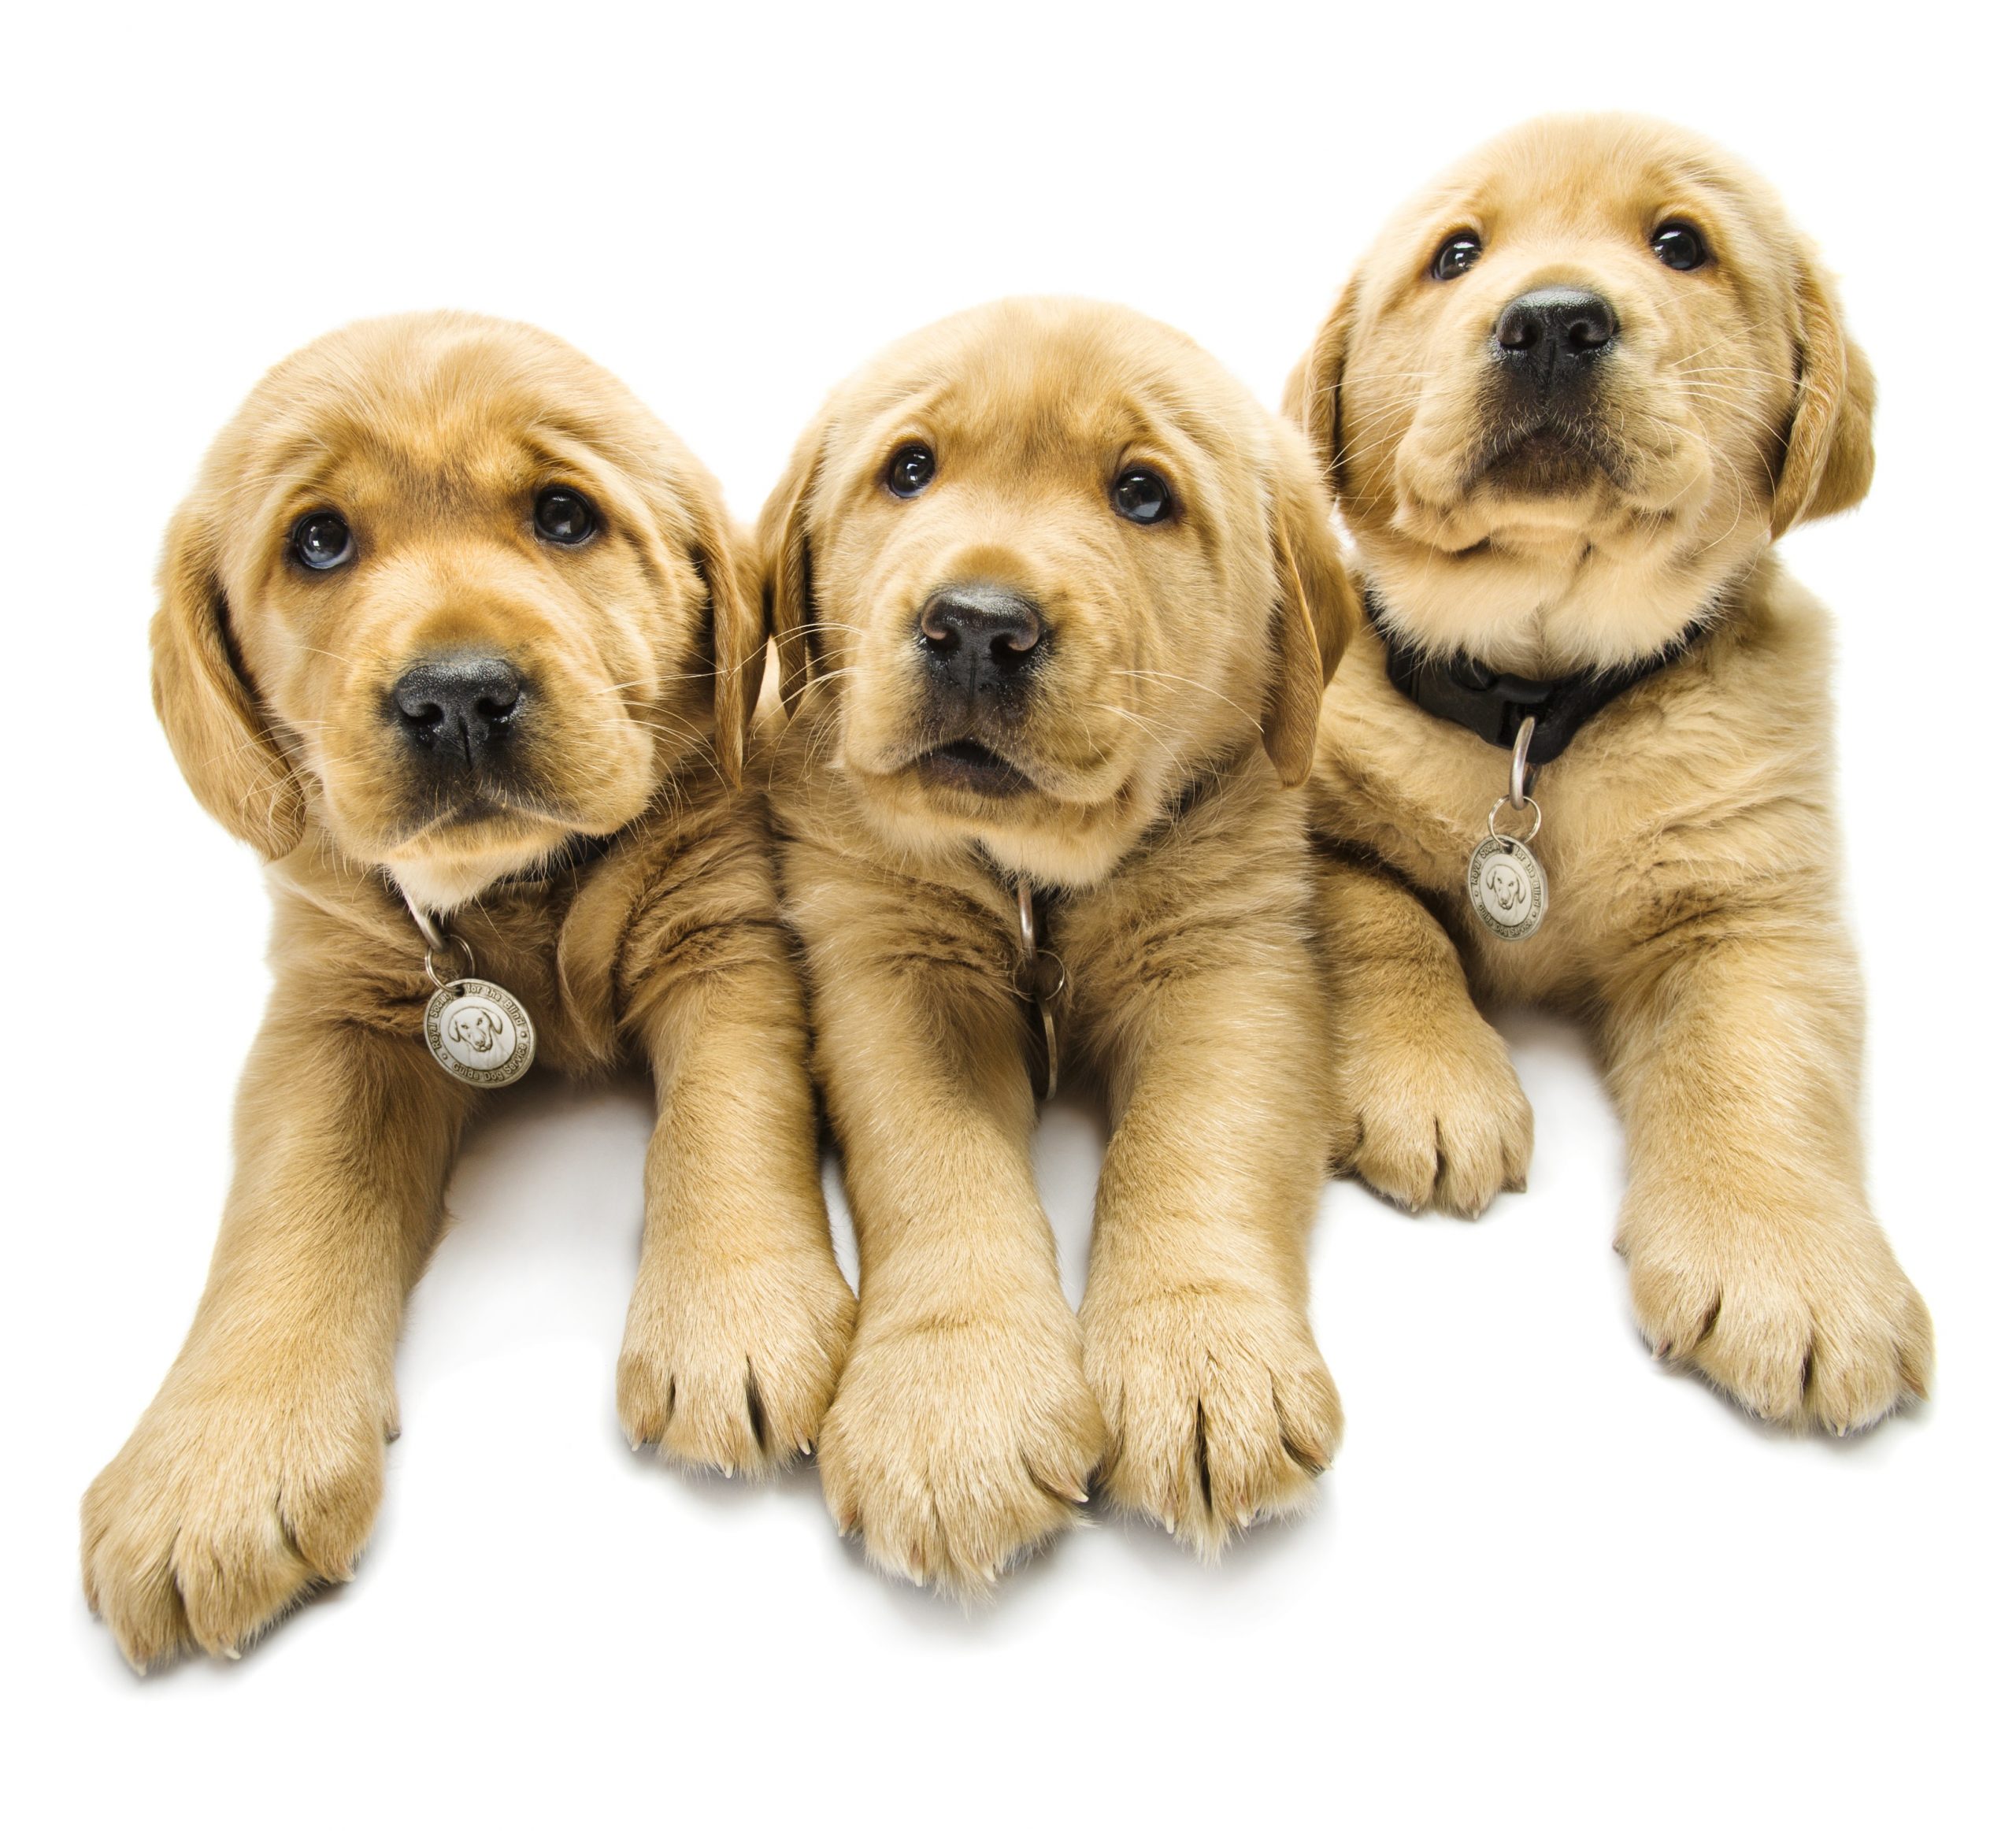 Three yellow puppies lined up looking up at the camera